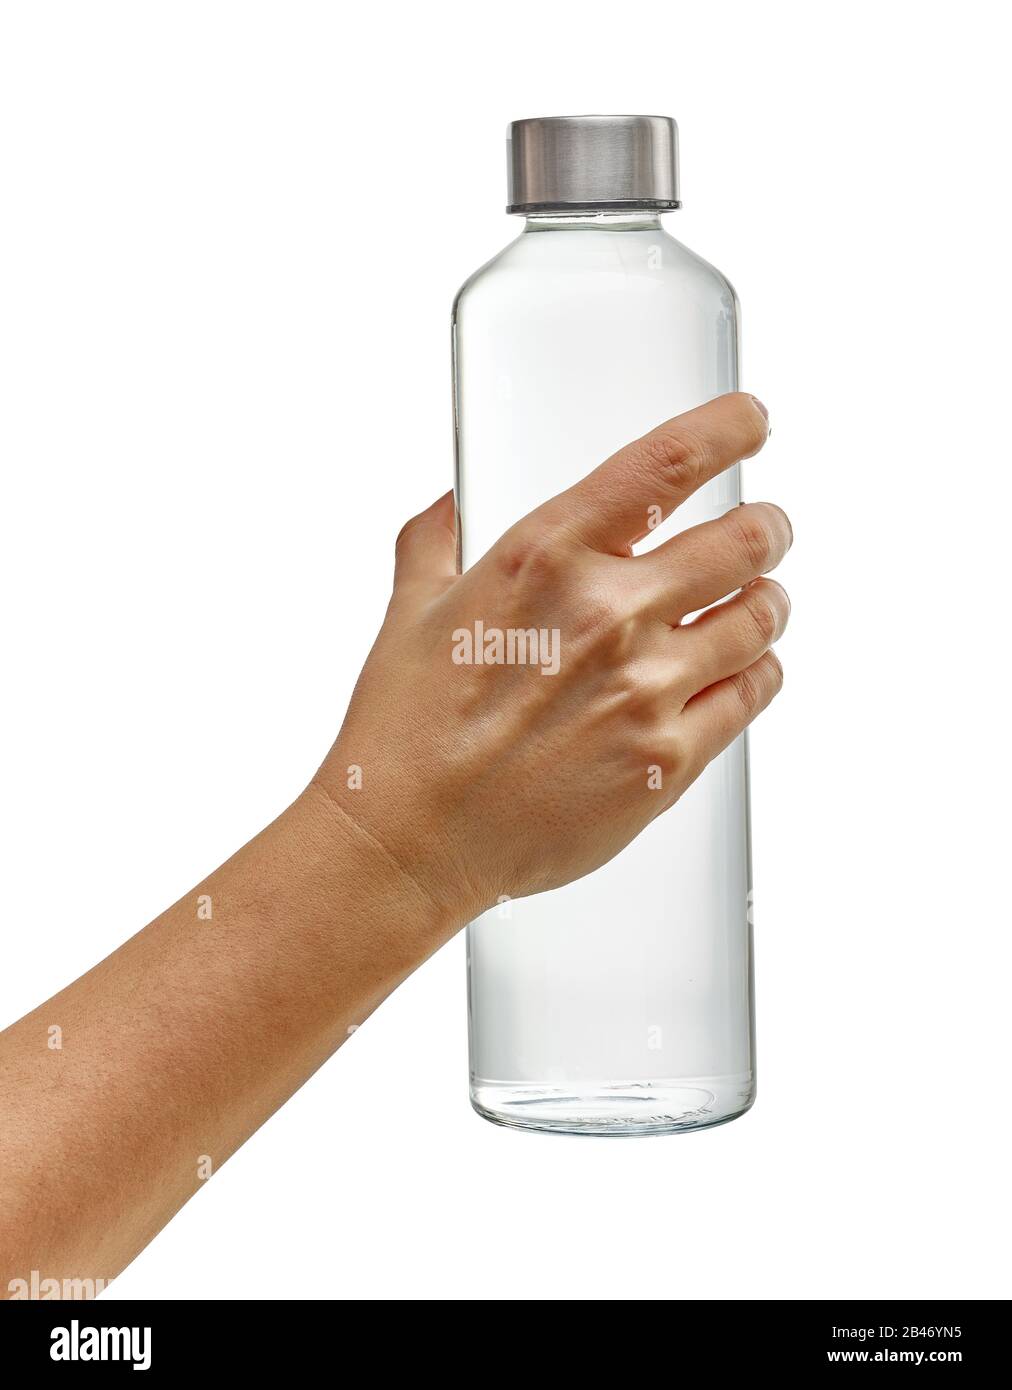 https://c8.alamy.com/comp/2B46YN5/hand-holding-reusable-glass-bottle-with-drinking-water-isolated-on-white-background-2B46YN5.jpg